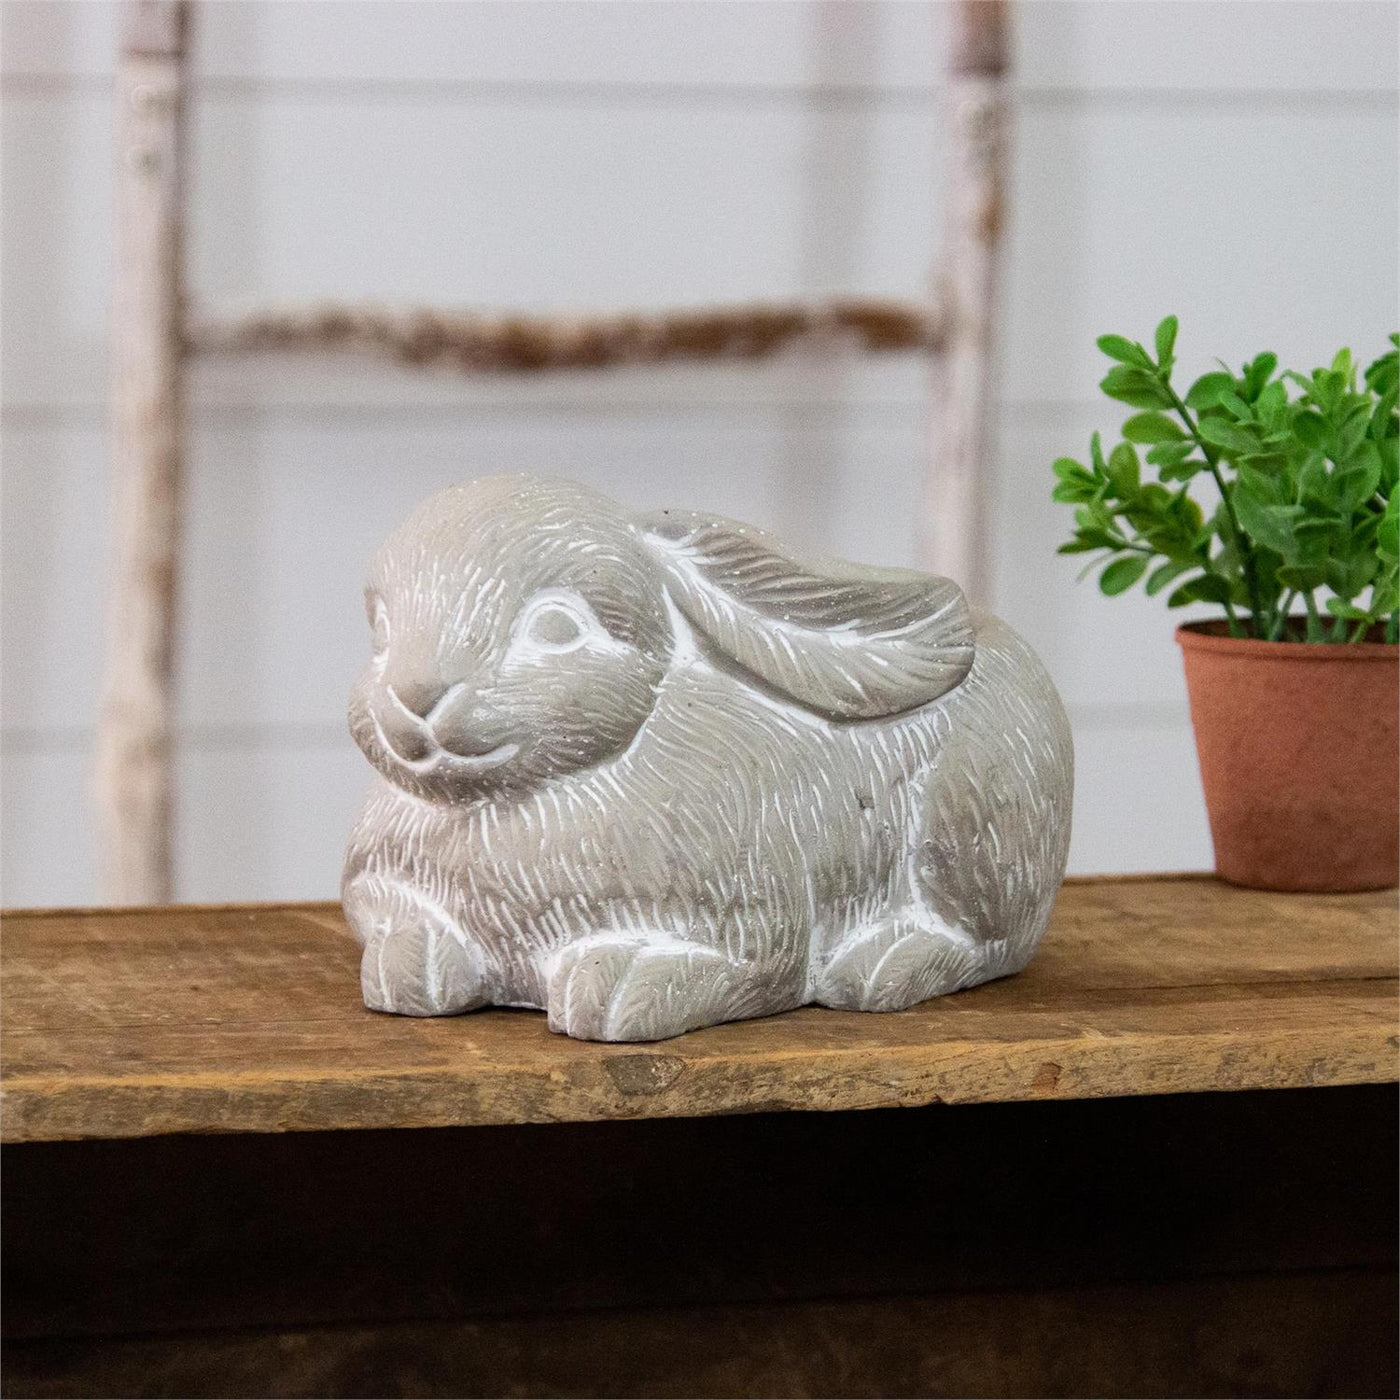 DAY 1 🐇🐥 20 DAYS OF BUNNIES + CHICKS Natural Bunny Shaped Cement Planter